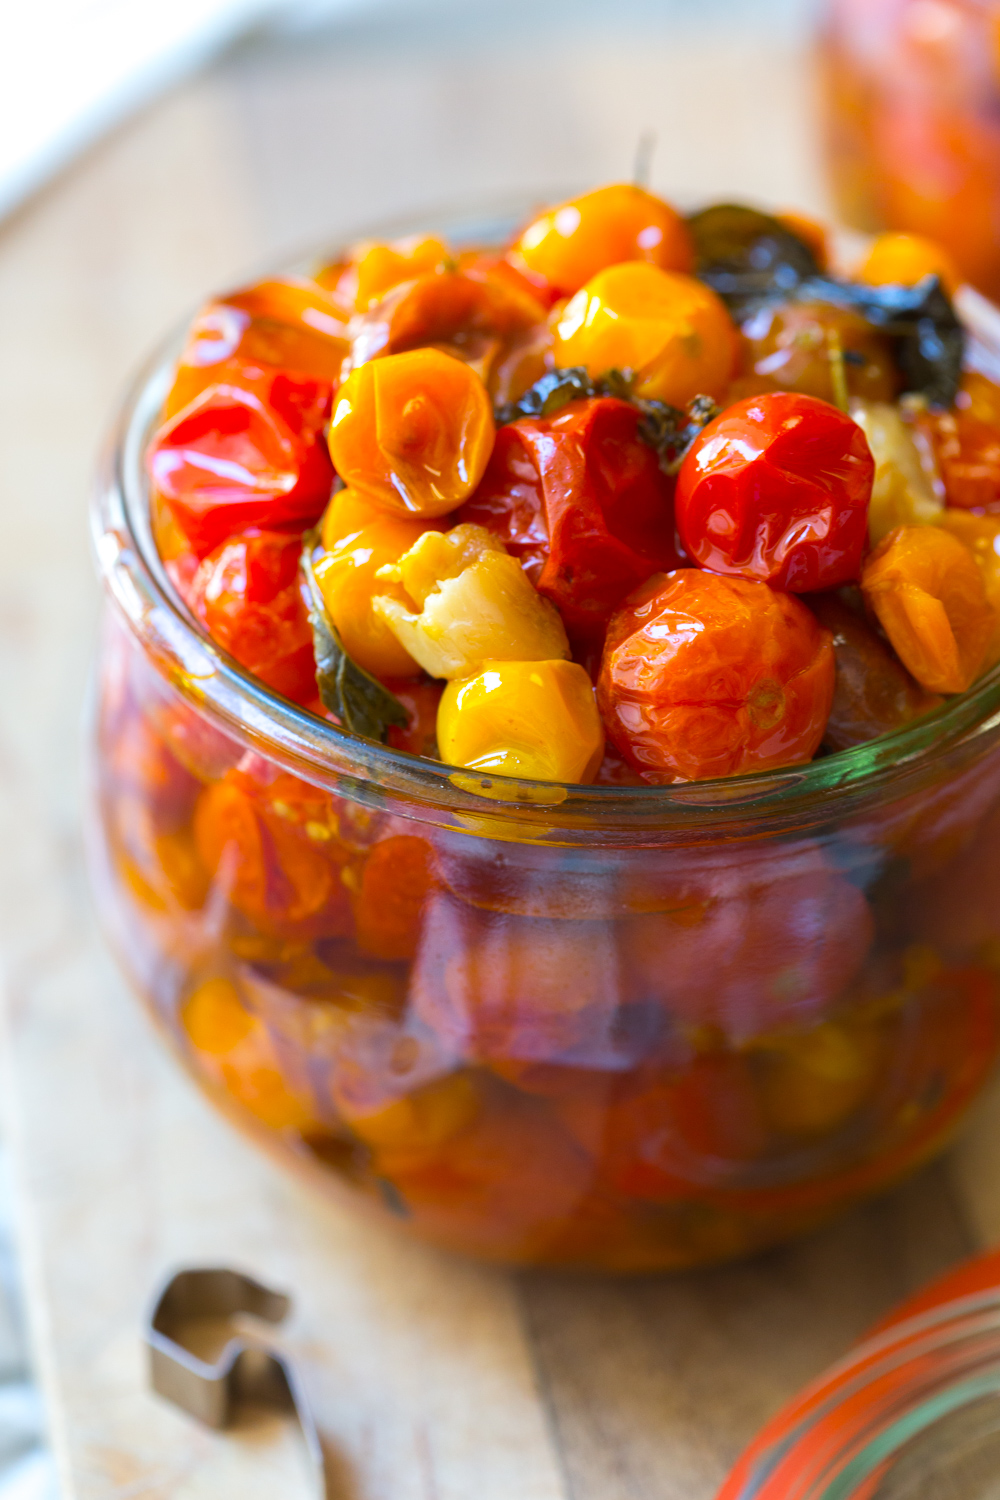 a close up of a jar of Cherry Tomato Confit, multi-colored tomatoes glistening in the light